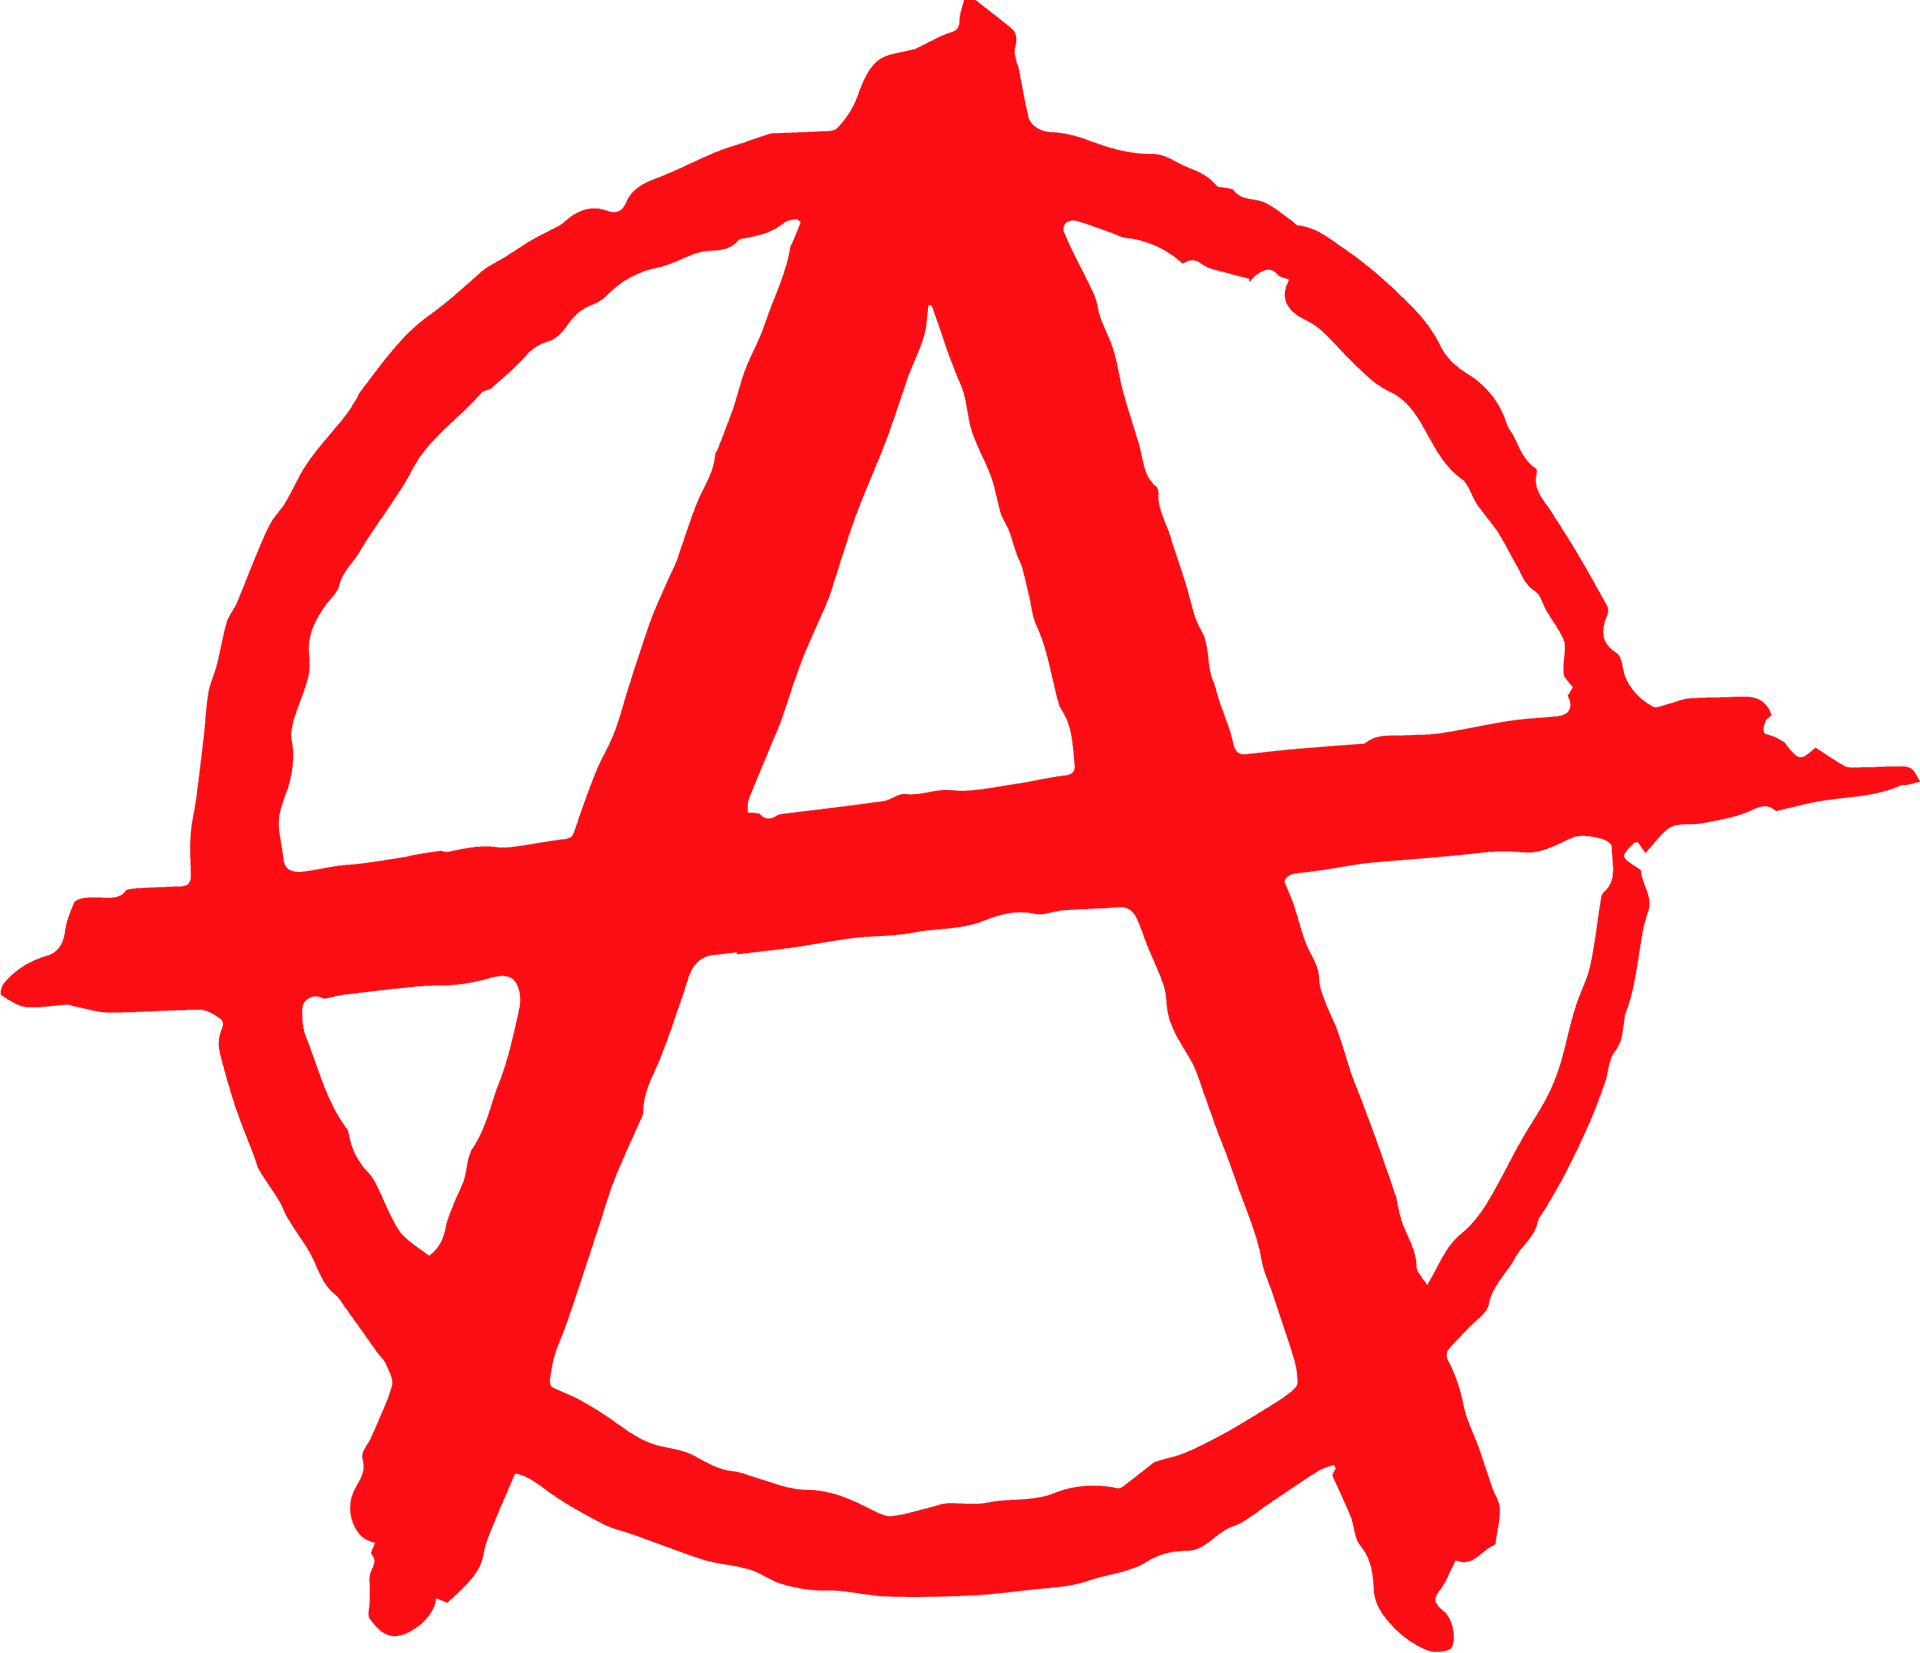 Red Anarchy Symbolon Blue Background.png PNG